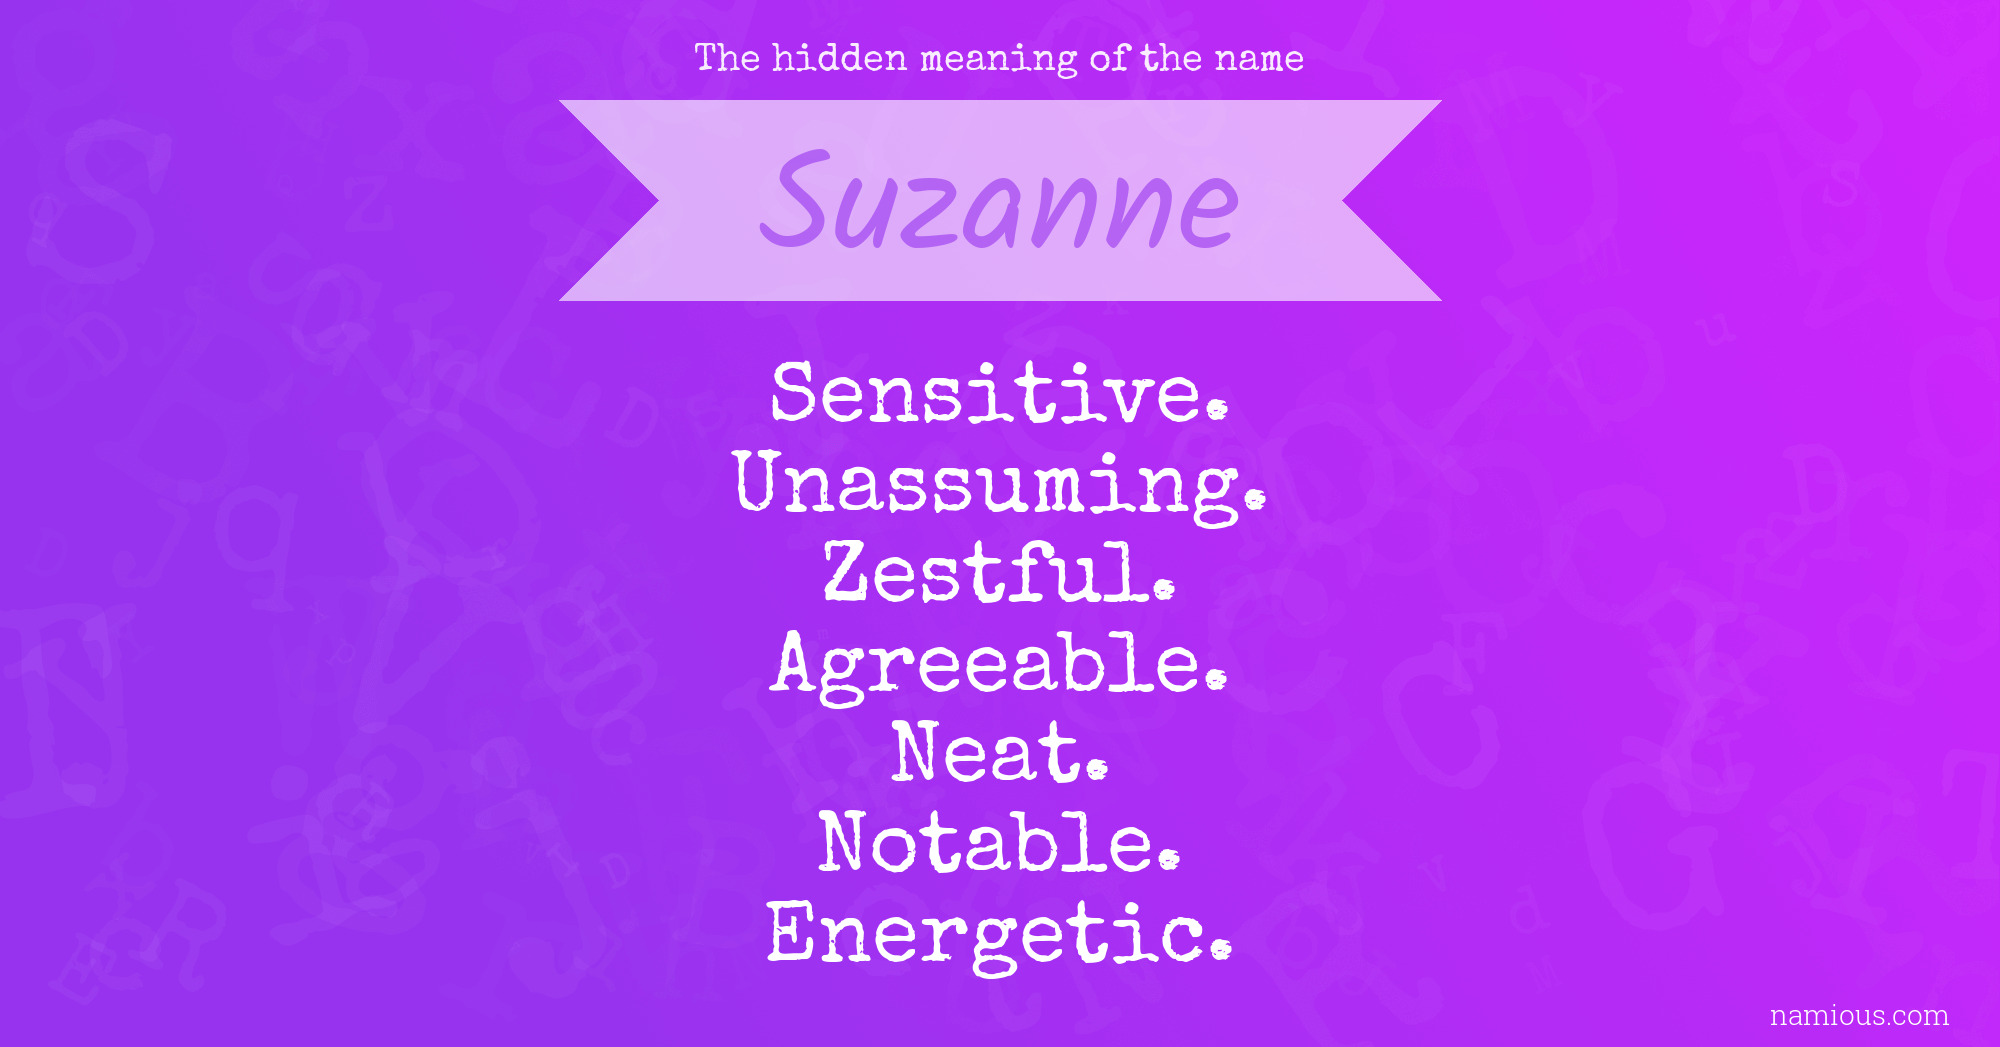 The hidden meaning of the name Suzanne